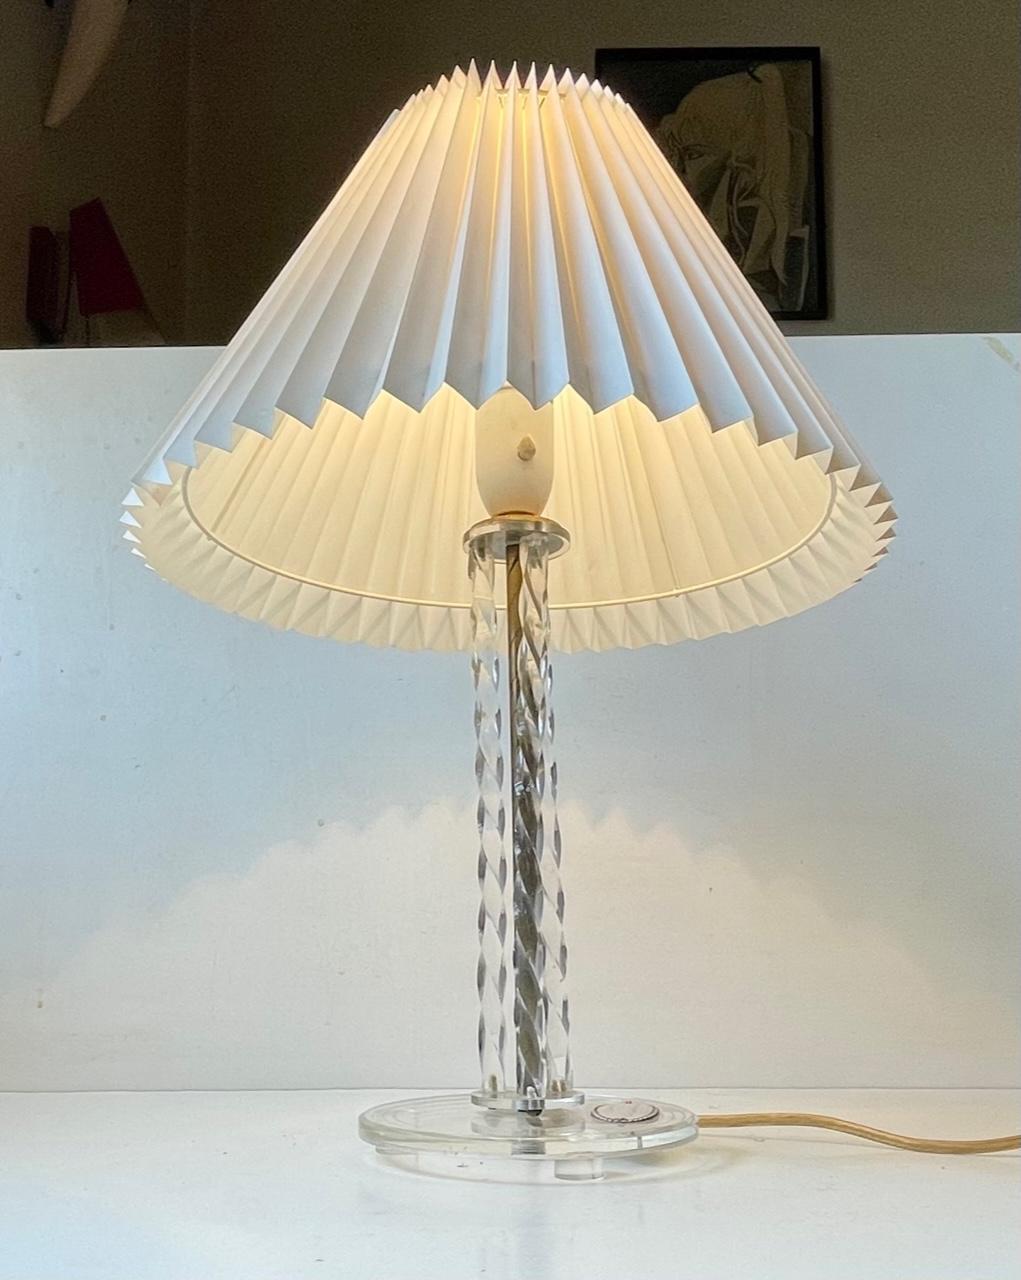 A stylish table light that is composed of 3 clear twisted lucite columns around a brass center-stem/pole that also has a twisted pattern incised. It has a Copenhagen Sterling silver platter referring to a Garden Association in Sundbyvester